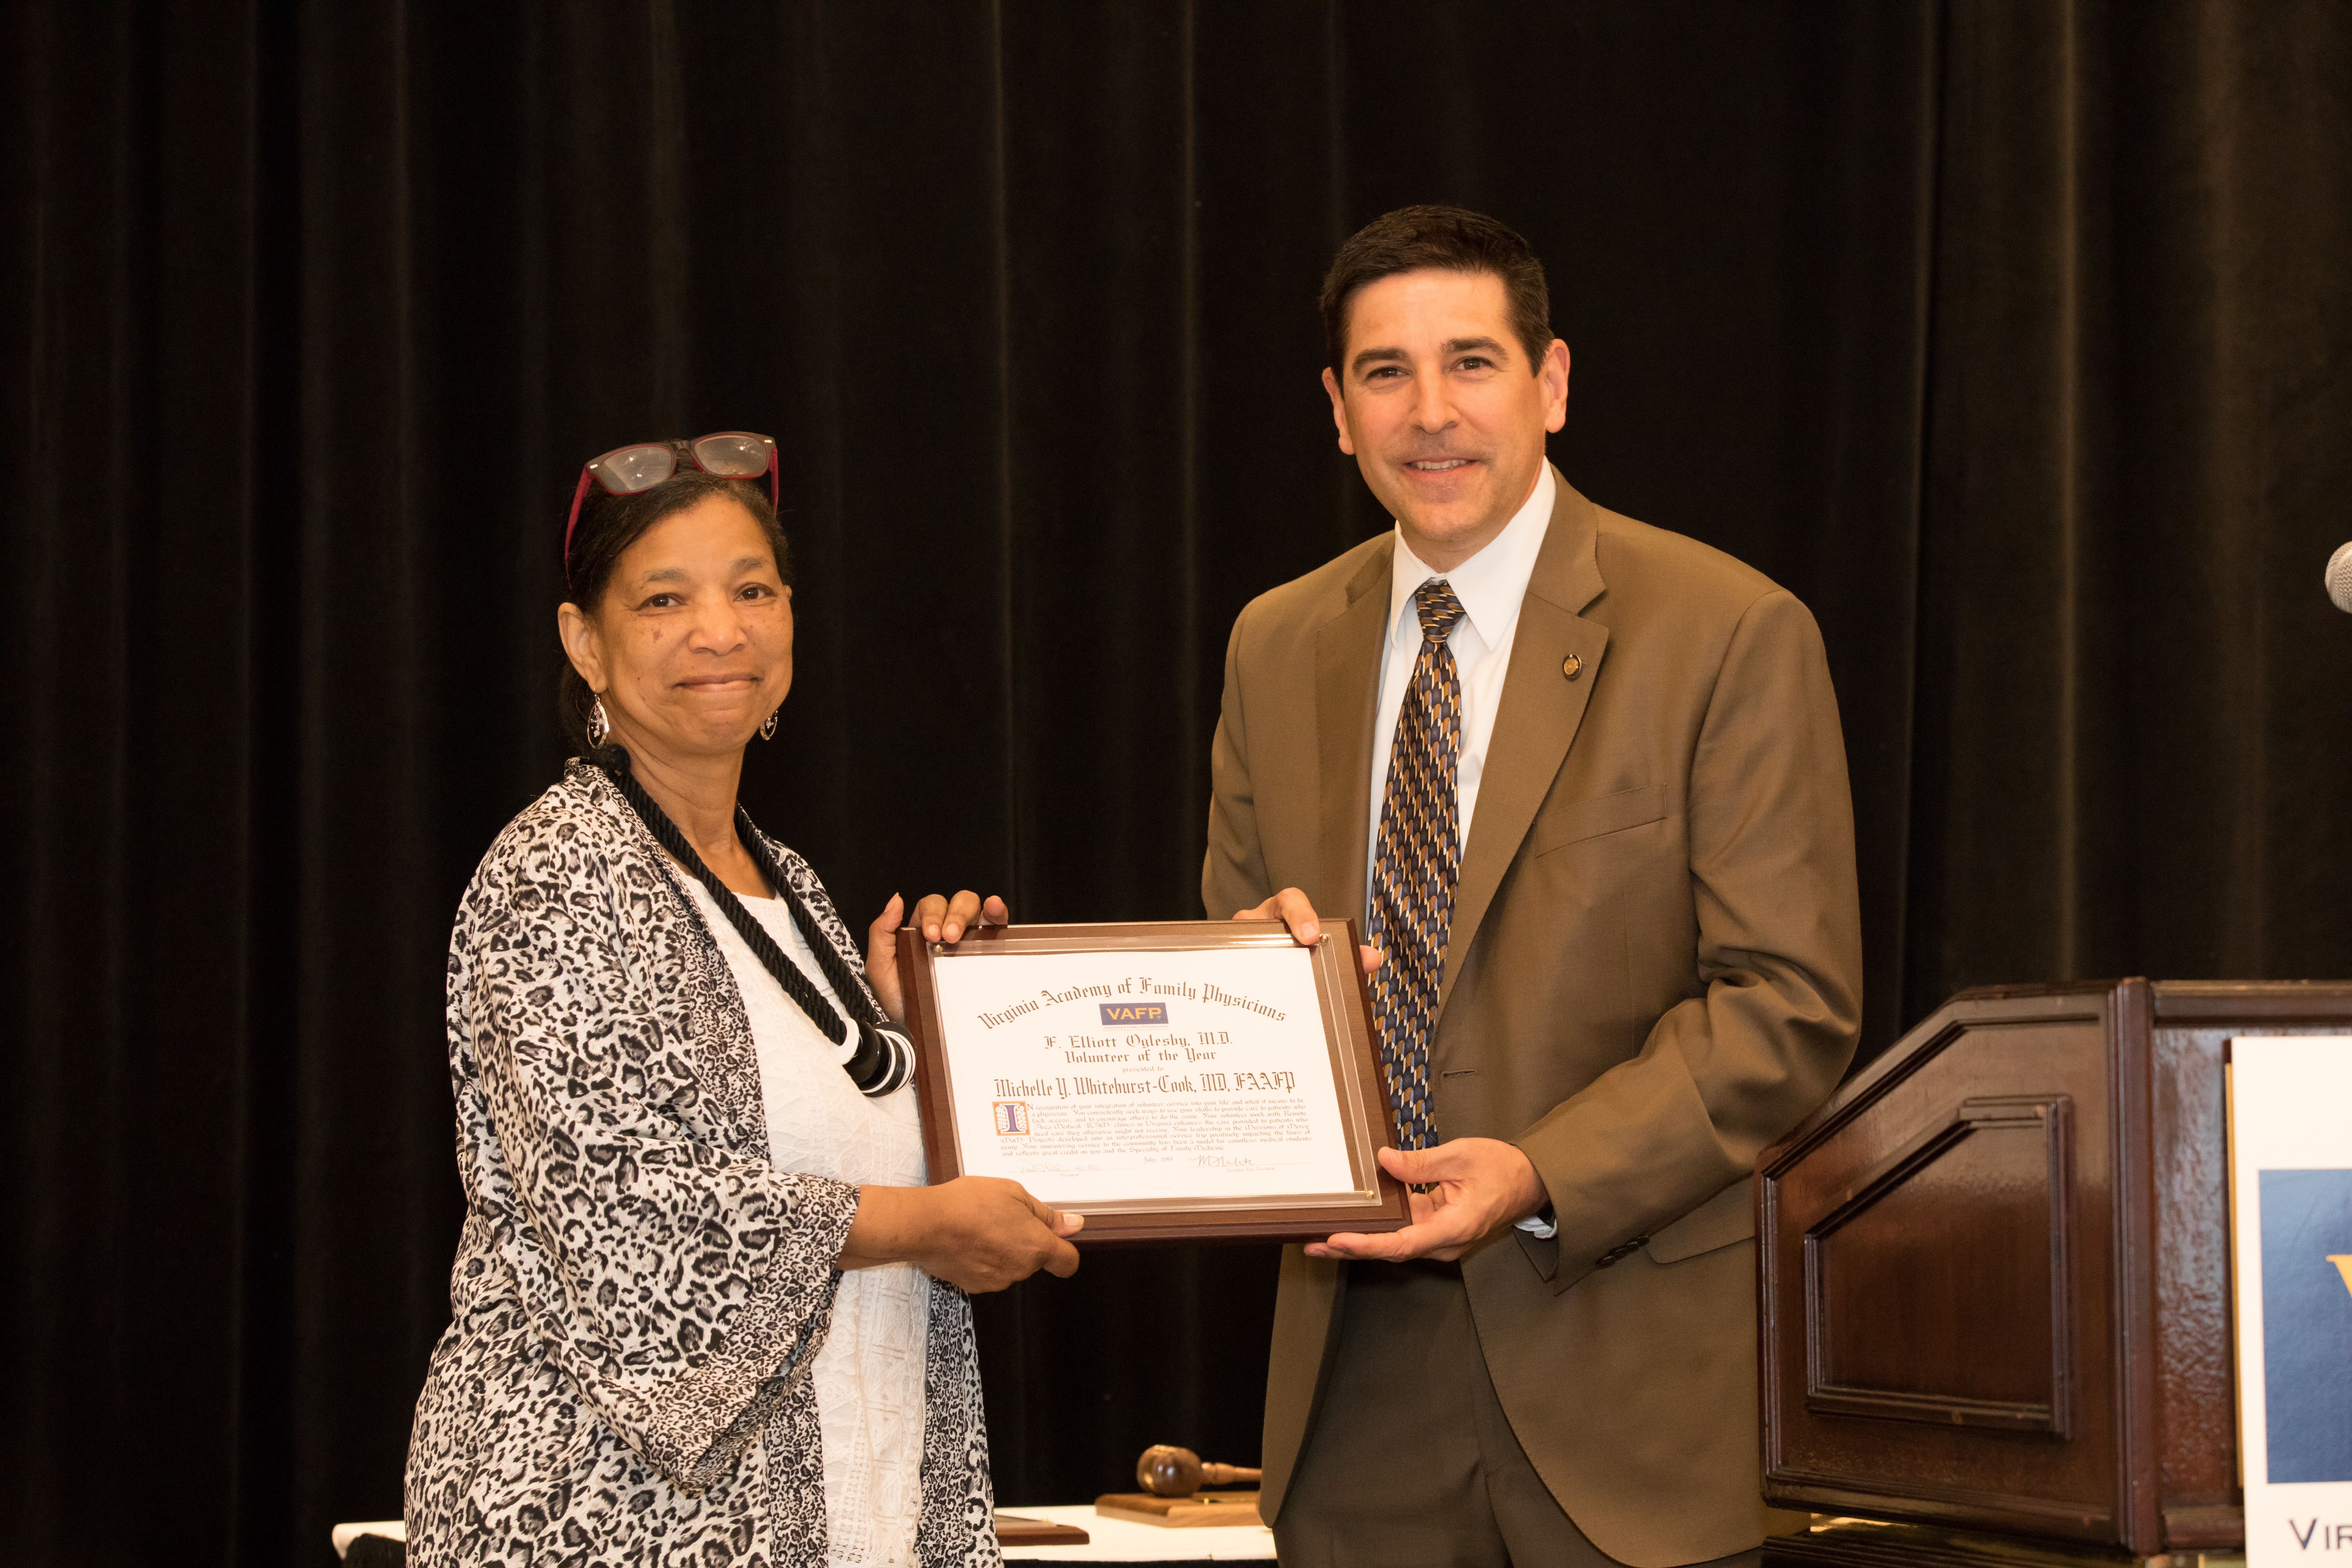 Dr. Michelle Whitehurst-Cook honored with the F. Elliott Oglesby, MD Volunteer of the Year Award for 2019